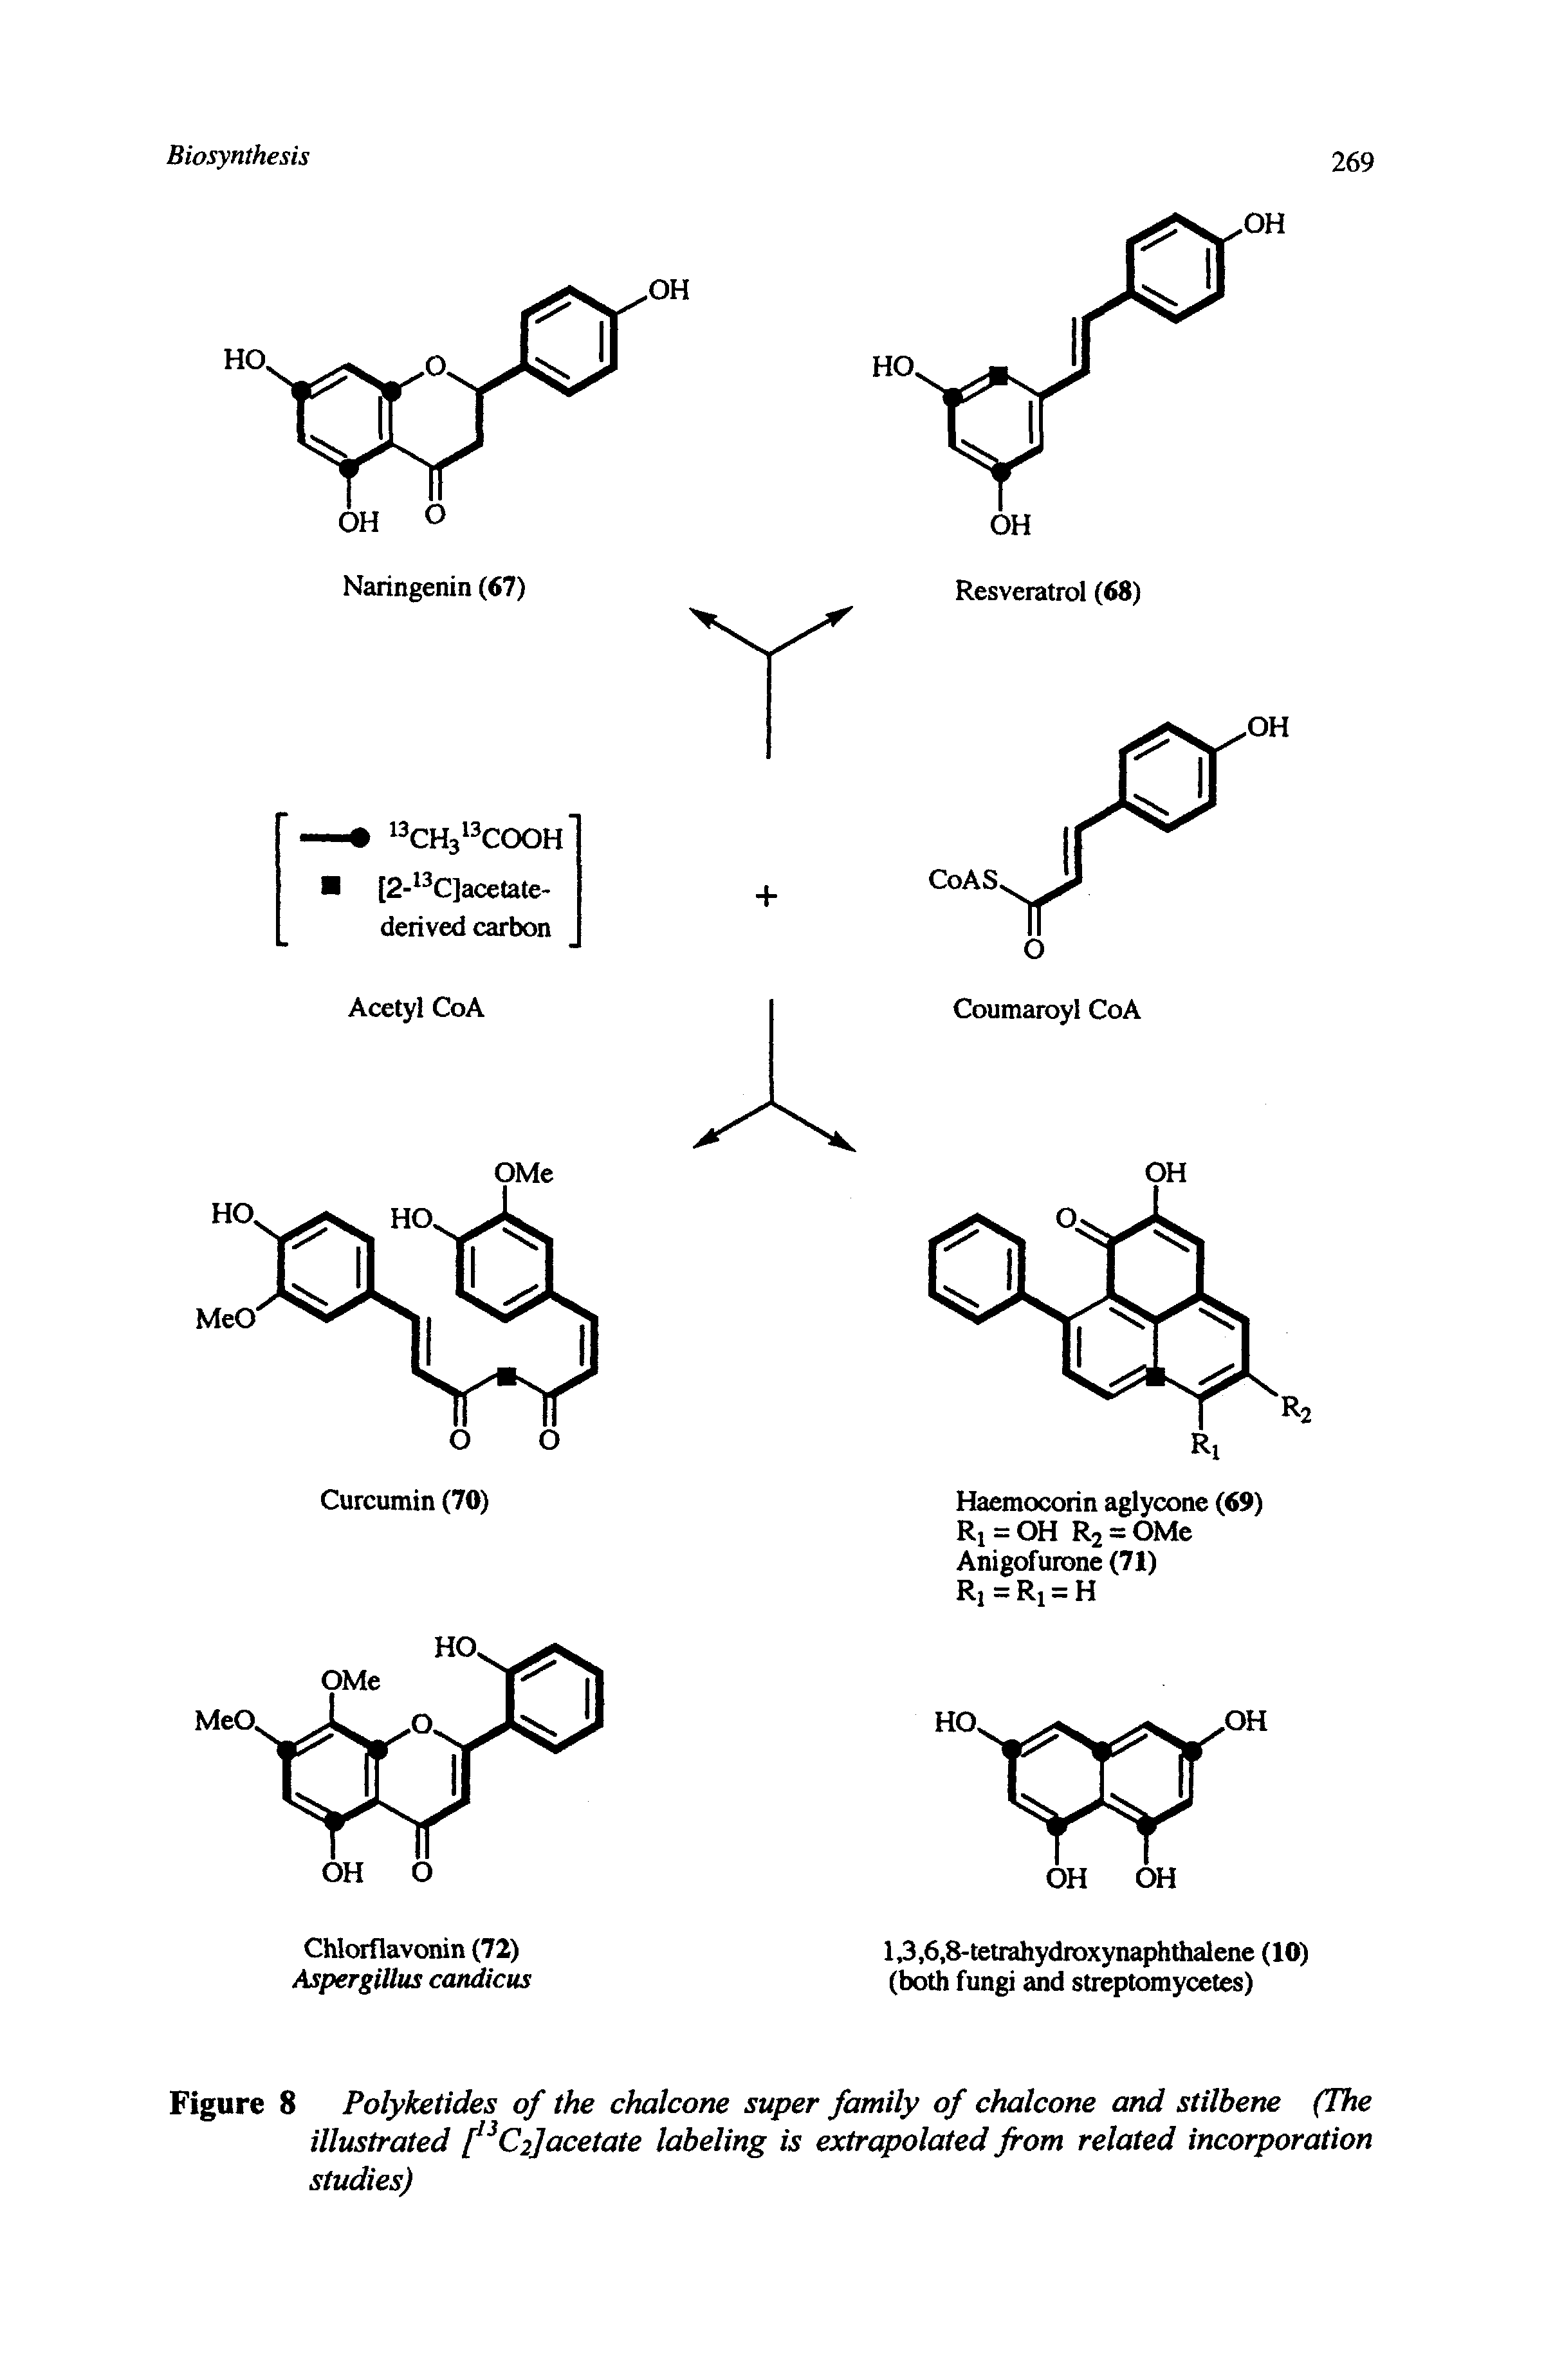 Figure 8 Polyketides of the chalcone super family of chalcone and stilbene (The illustrated [ 2]acetate labeling is extrapolated from related incorporation studies)...